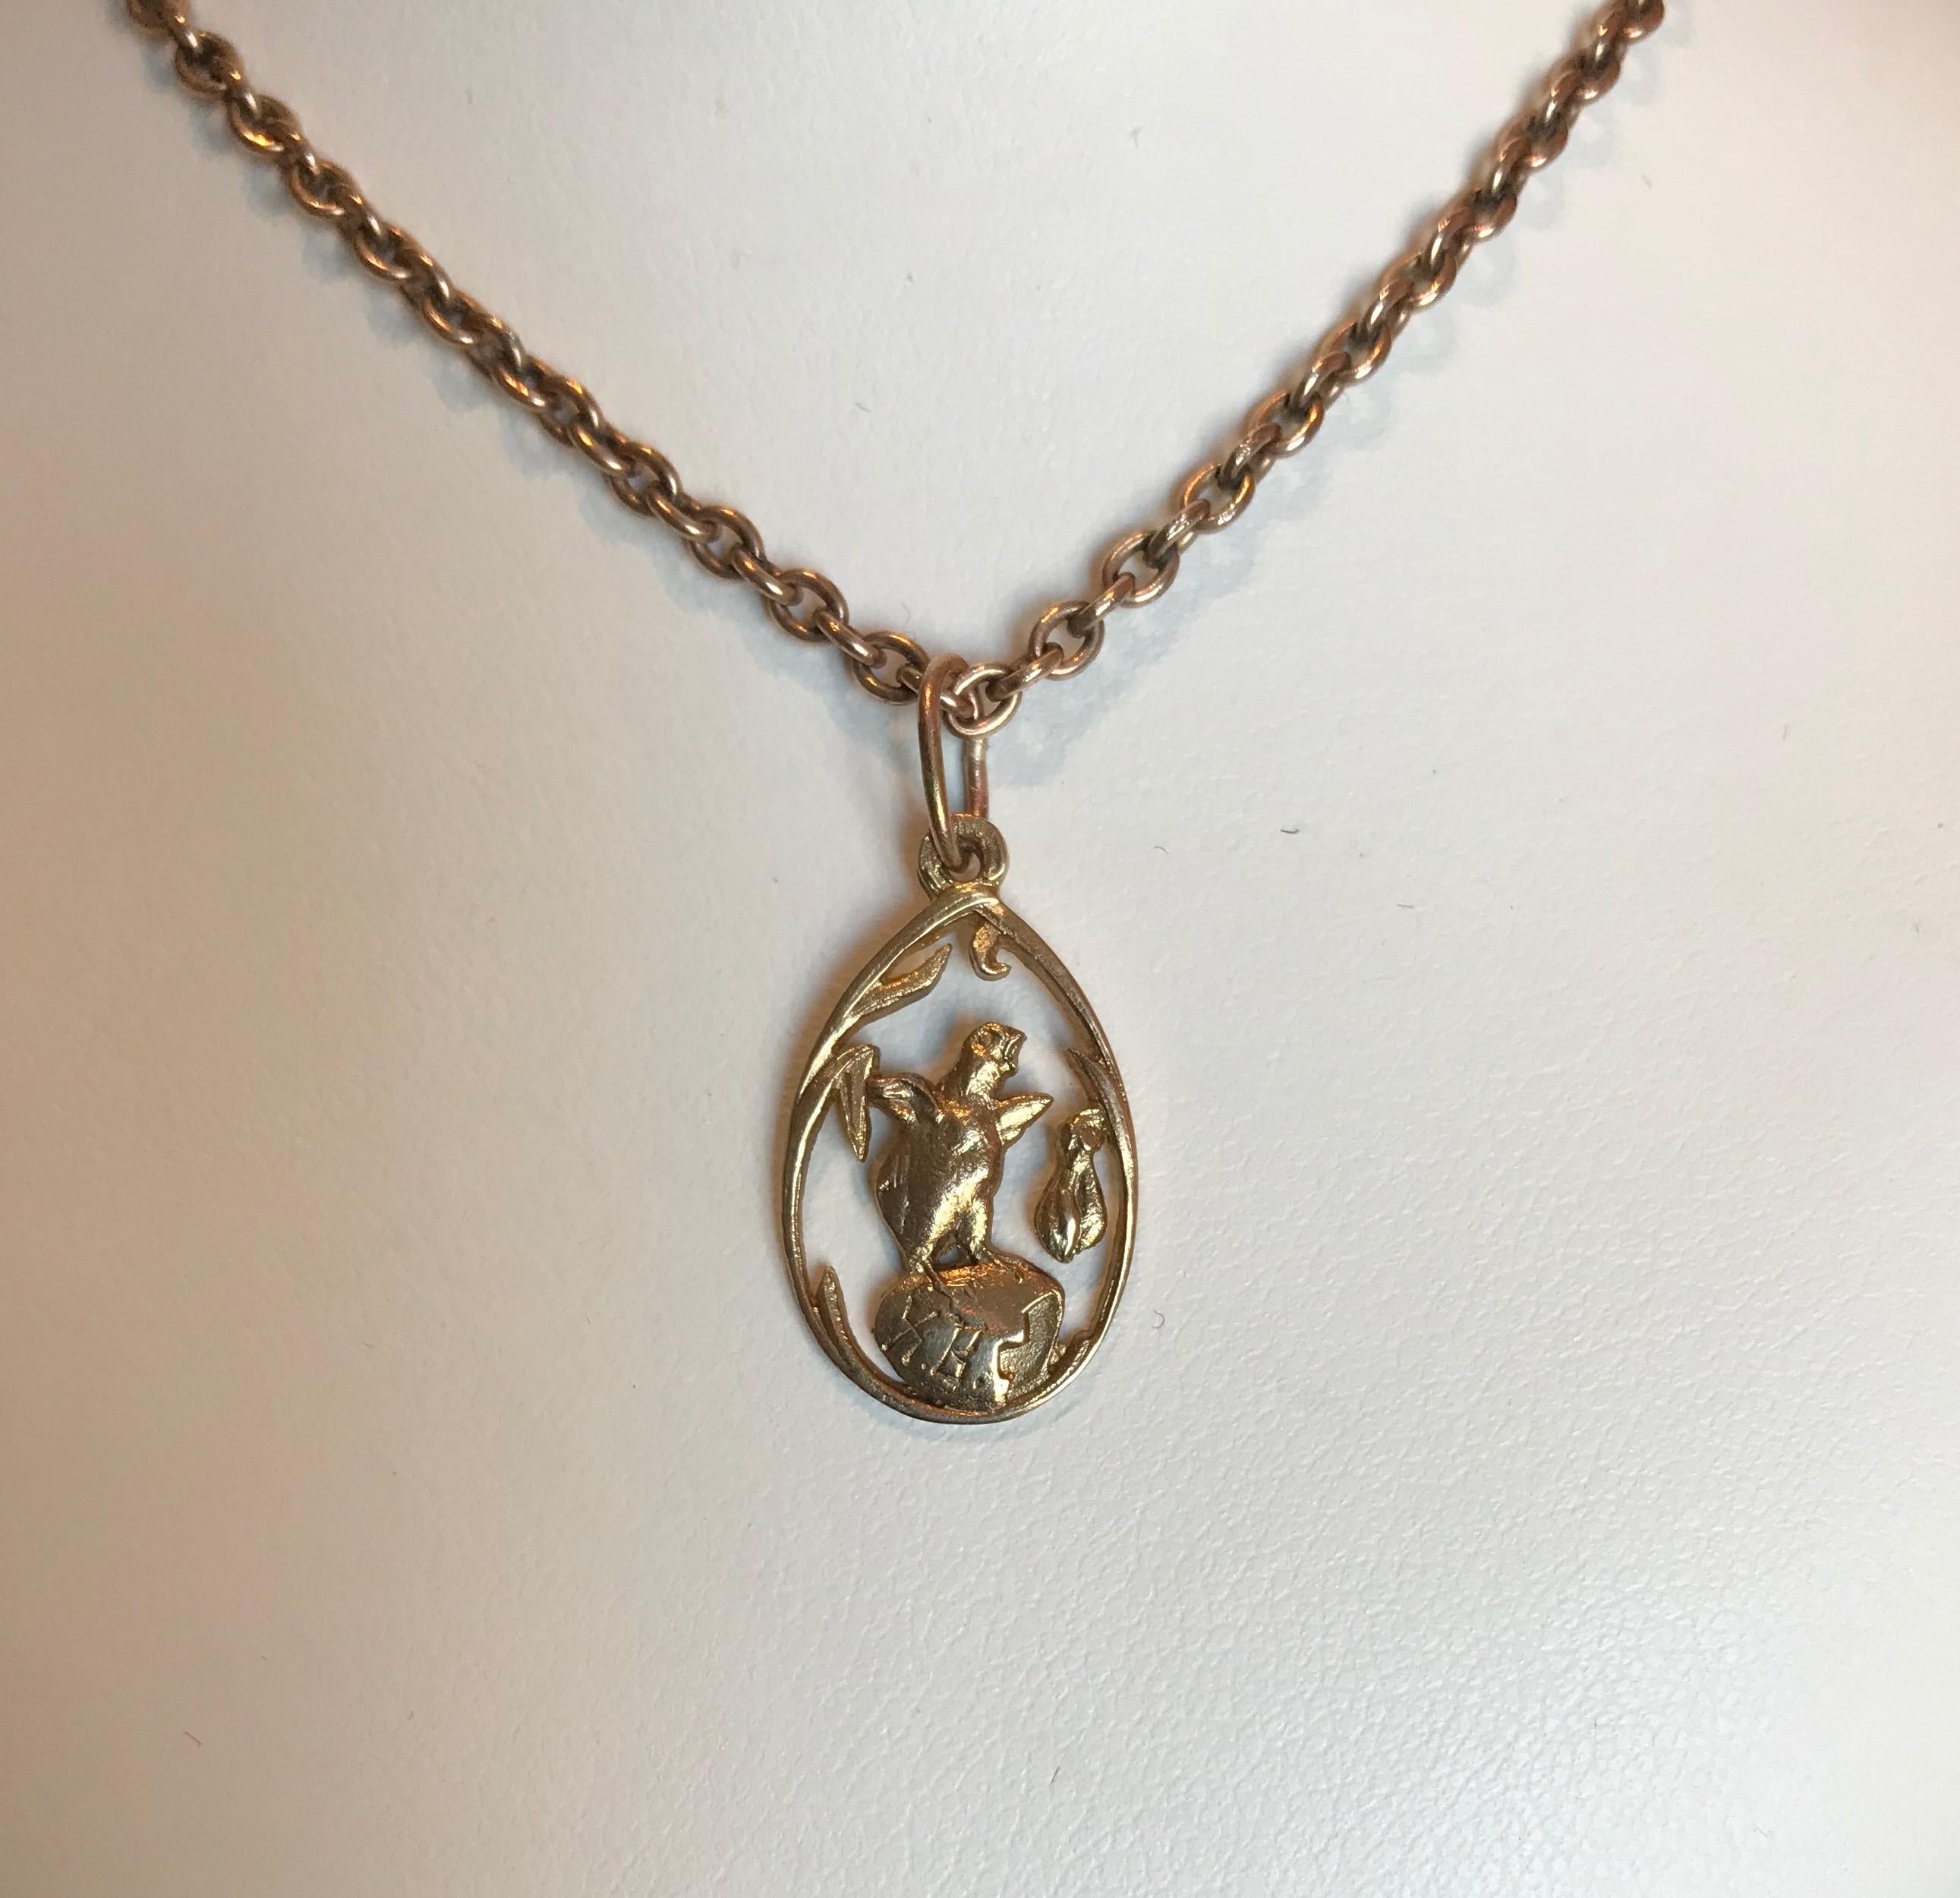 A Russian inspired egg-shaped pendant, of openwork gilded silver or vermeil design depicting a chick emerging from its egg, engraved XB, for Xristos Boskrese, or Christ is Risen in Russian. Only one left.

By Marie Betteley, 2004.

1 in. (2.5 cm.)